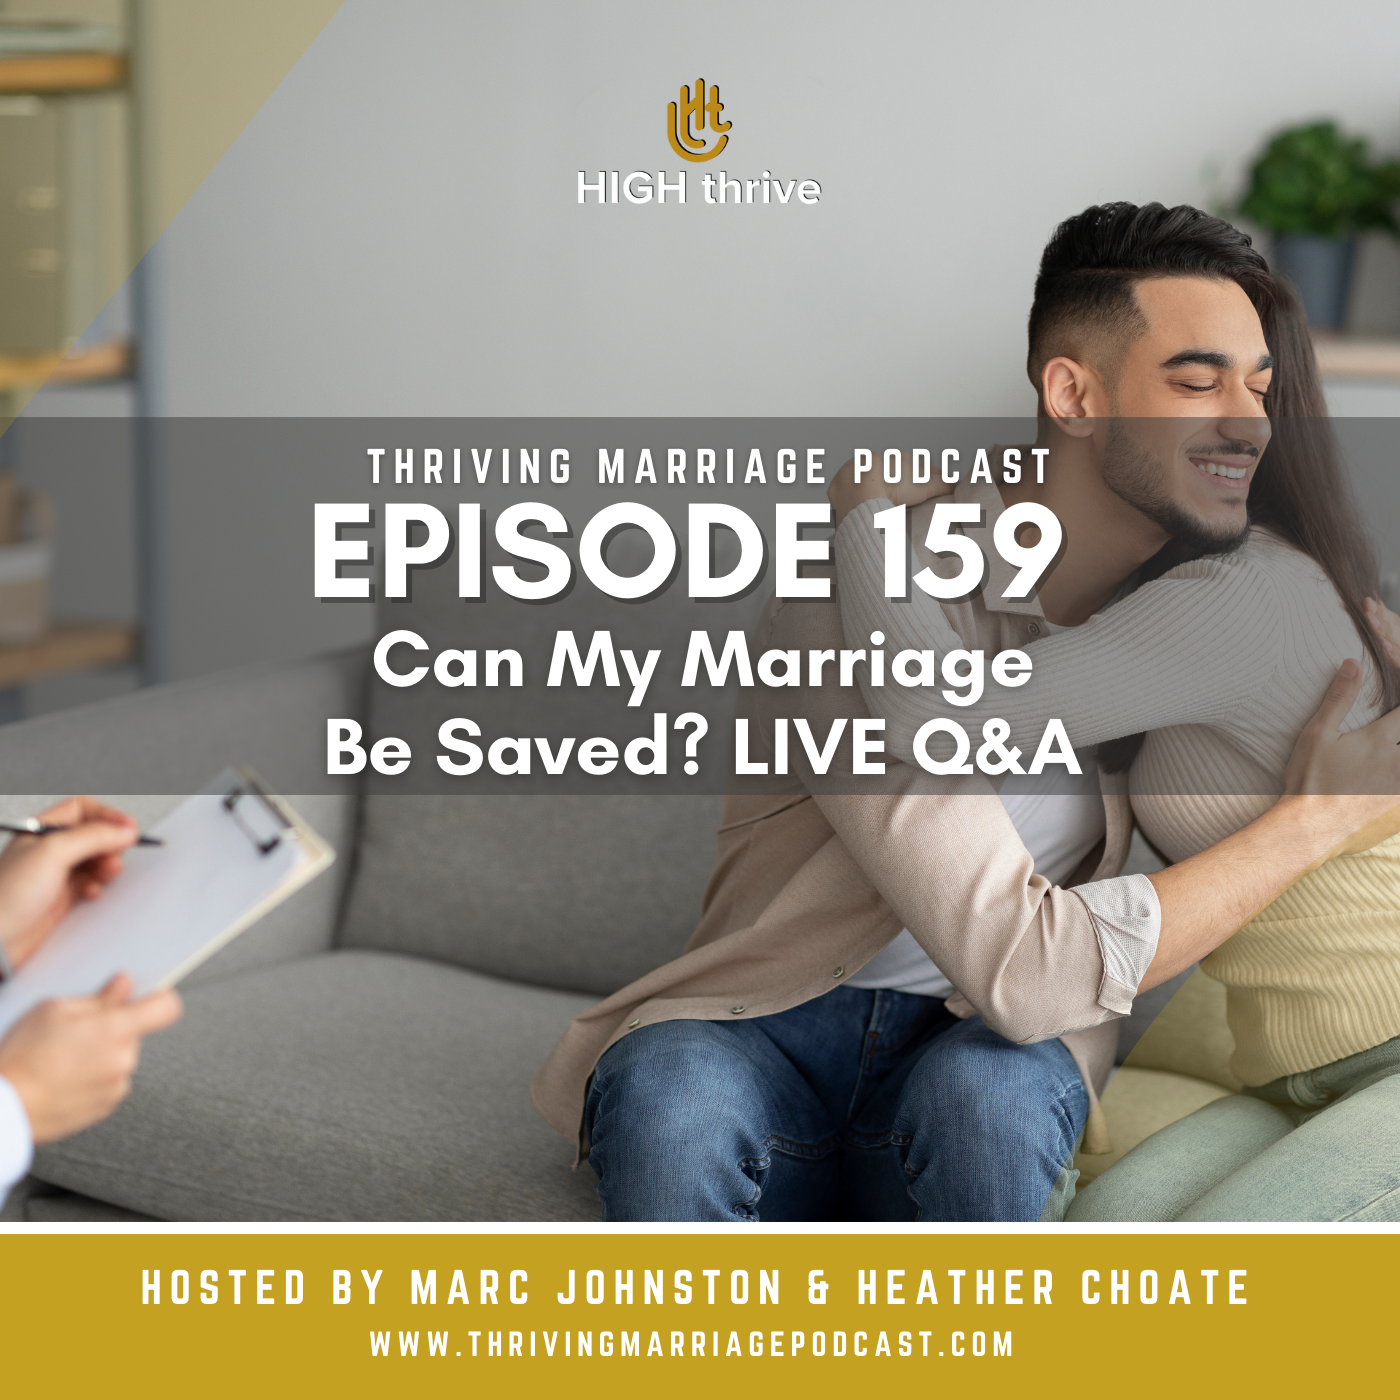 Episode 159: Can My Marriage Be Saved LIVE Q&A